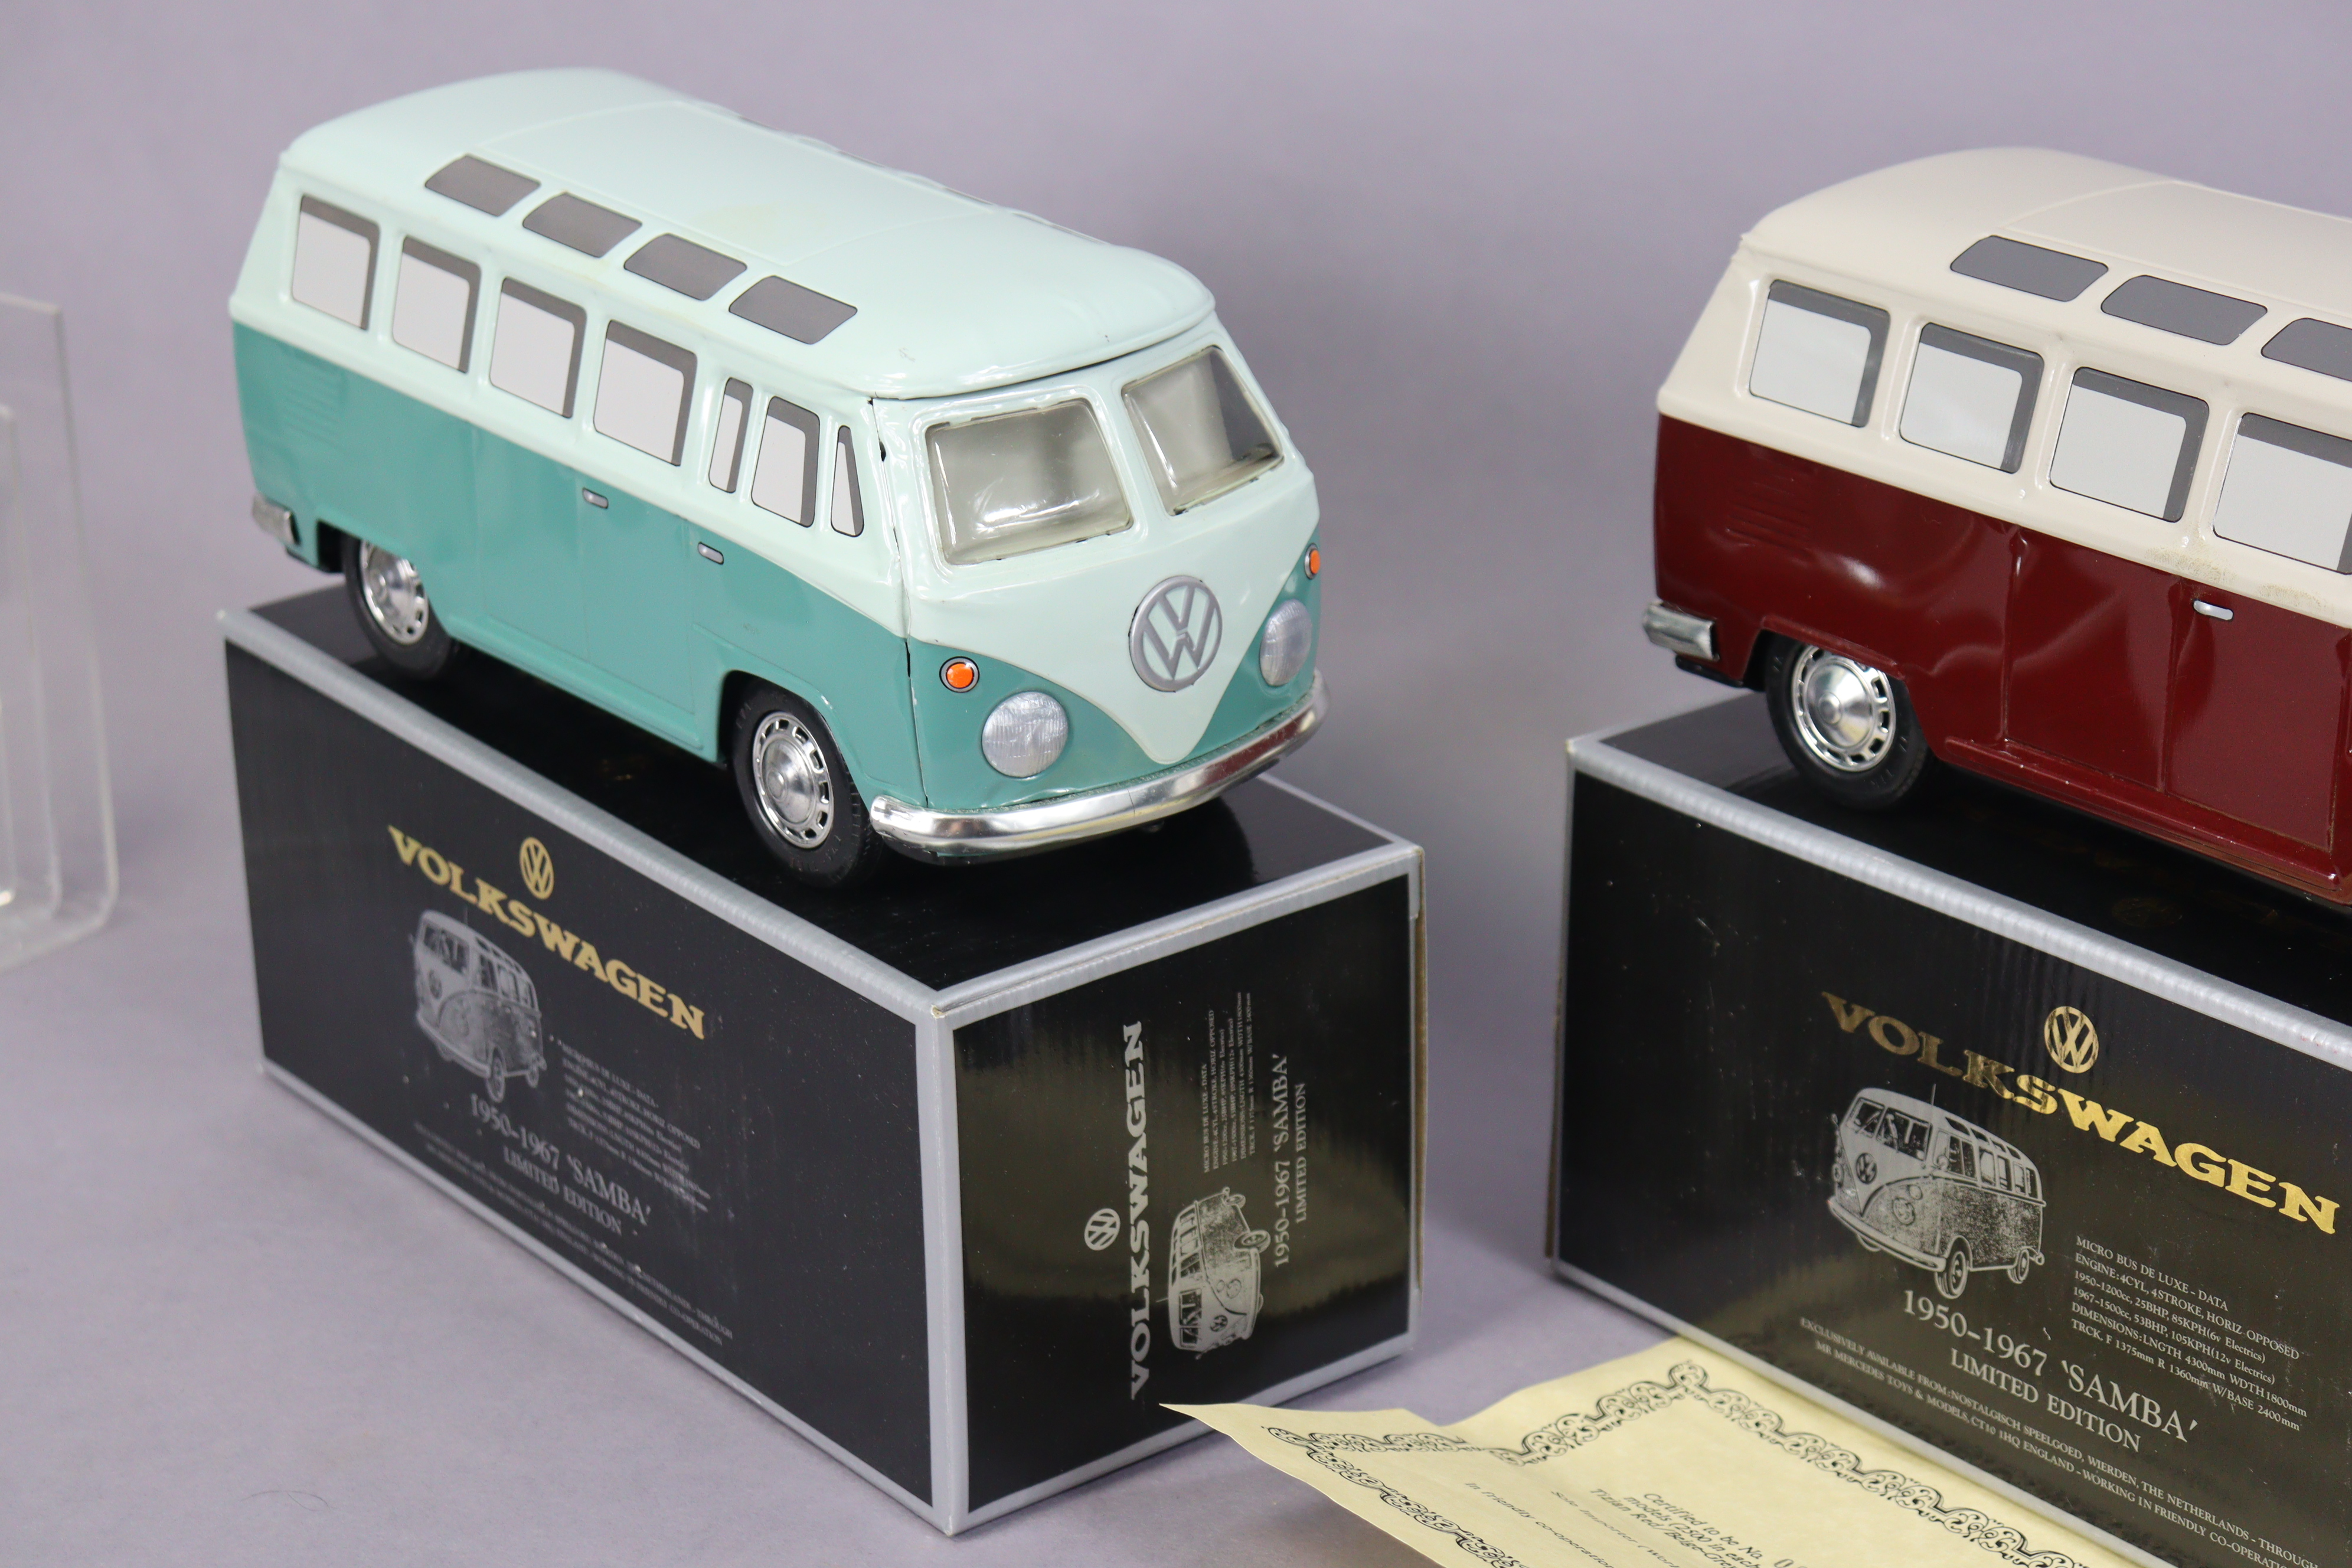 Two Ichiko Limited Edition scale model Volkswagen 1950-1967 “Samba” camper vans; both boxed. - Image 3 of 4